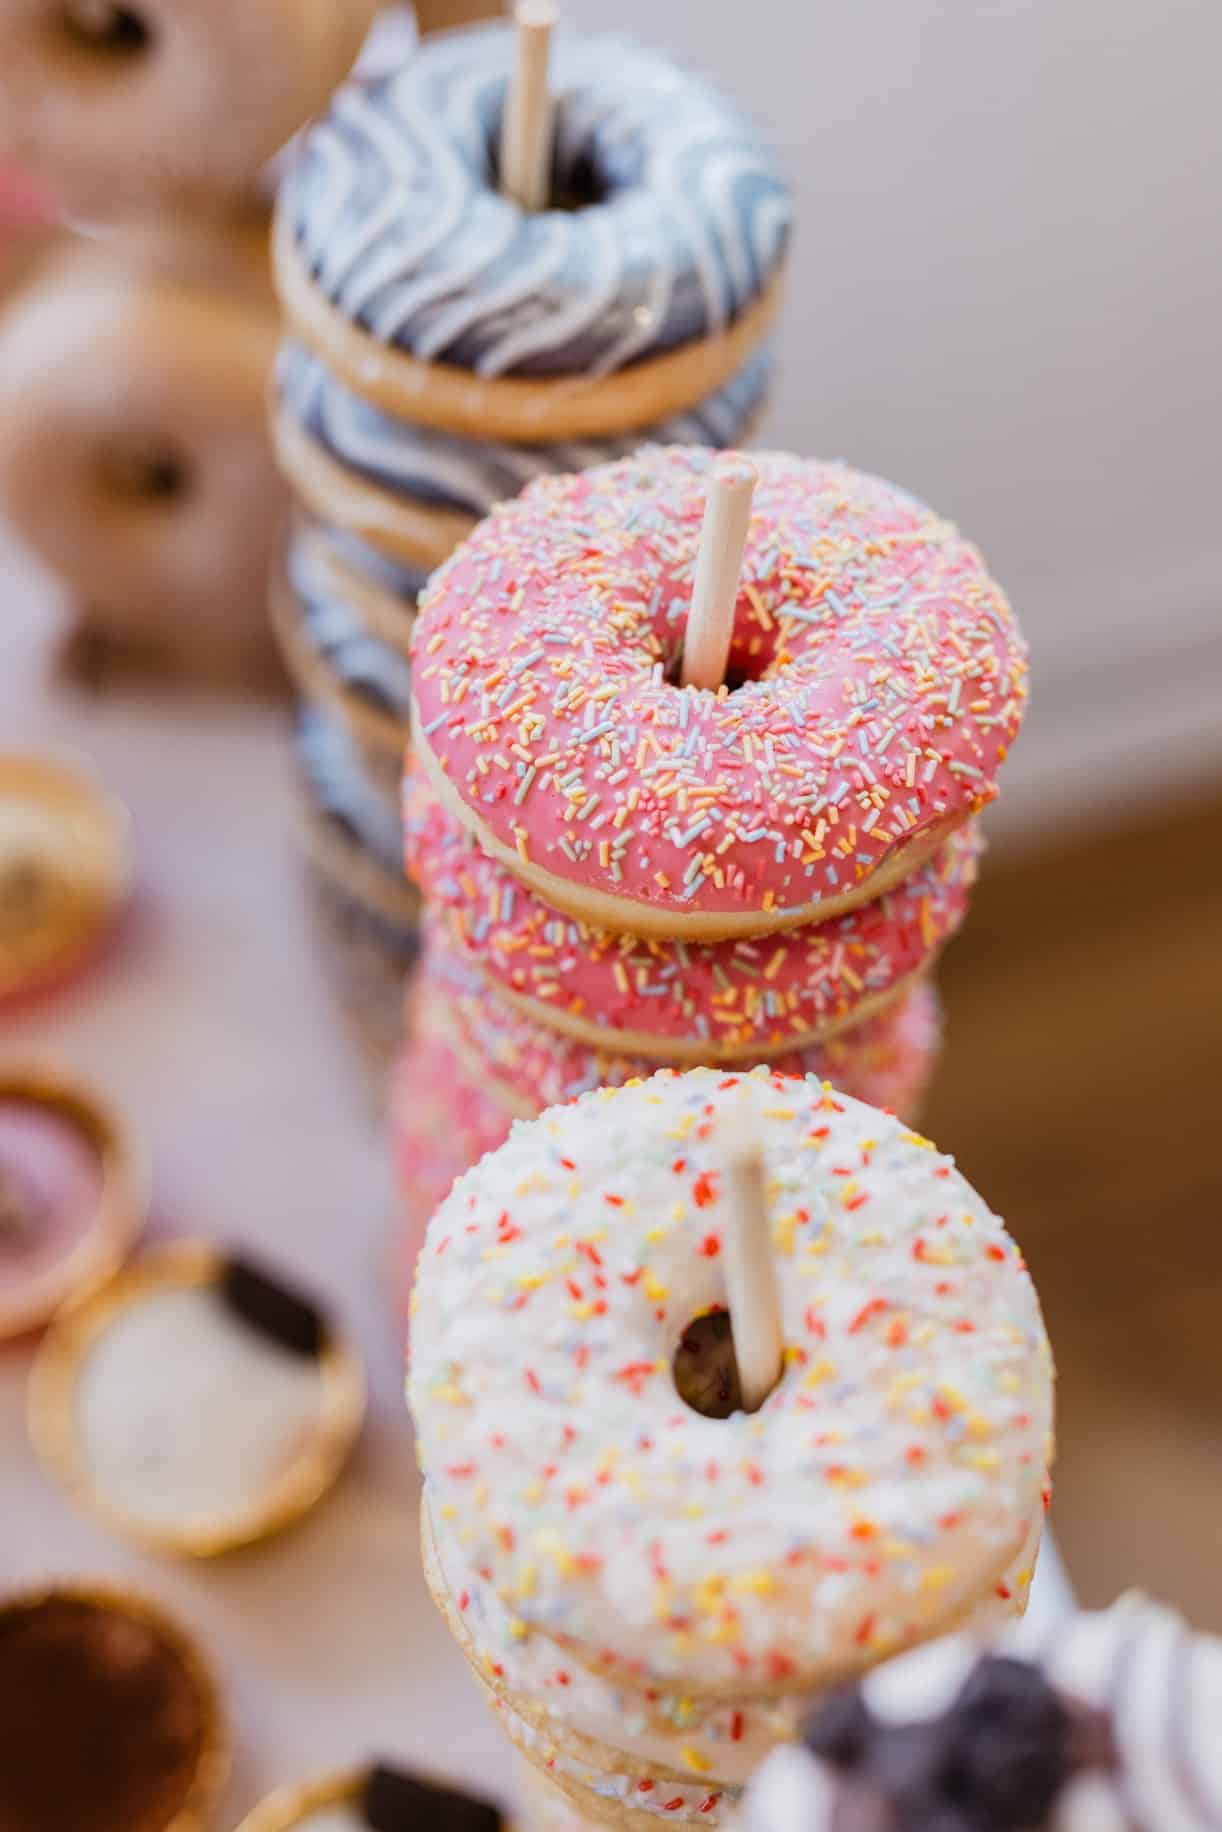 Donuts Instead of Wedding Cake